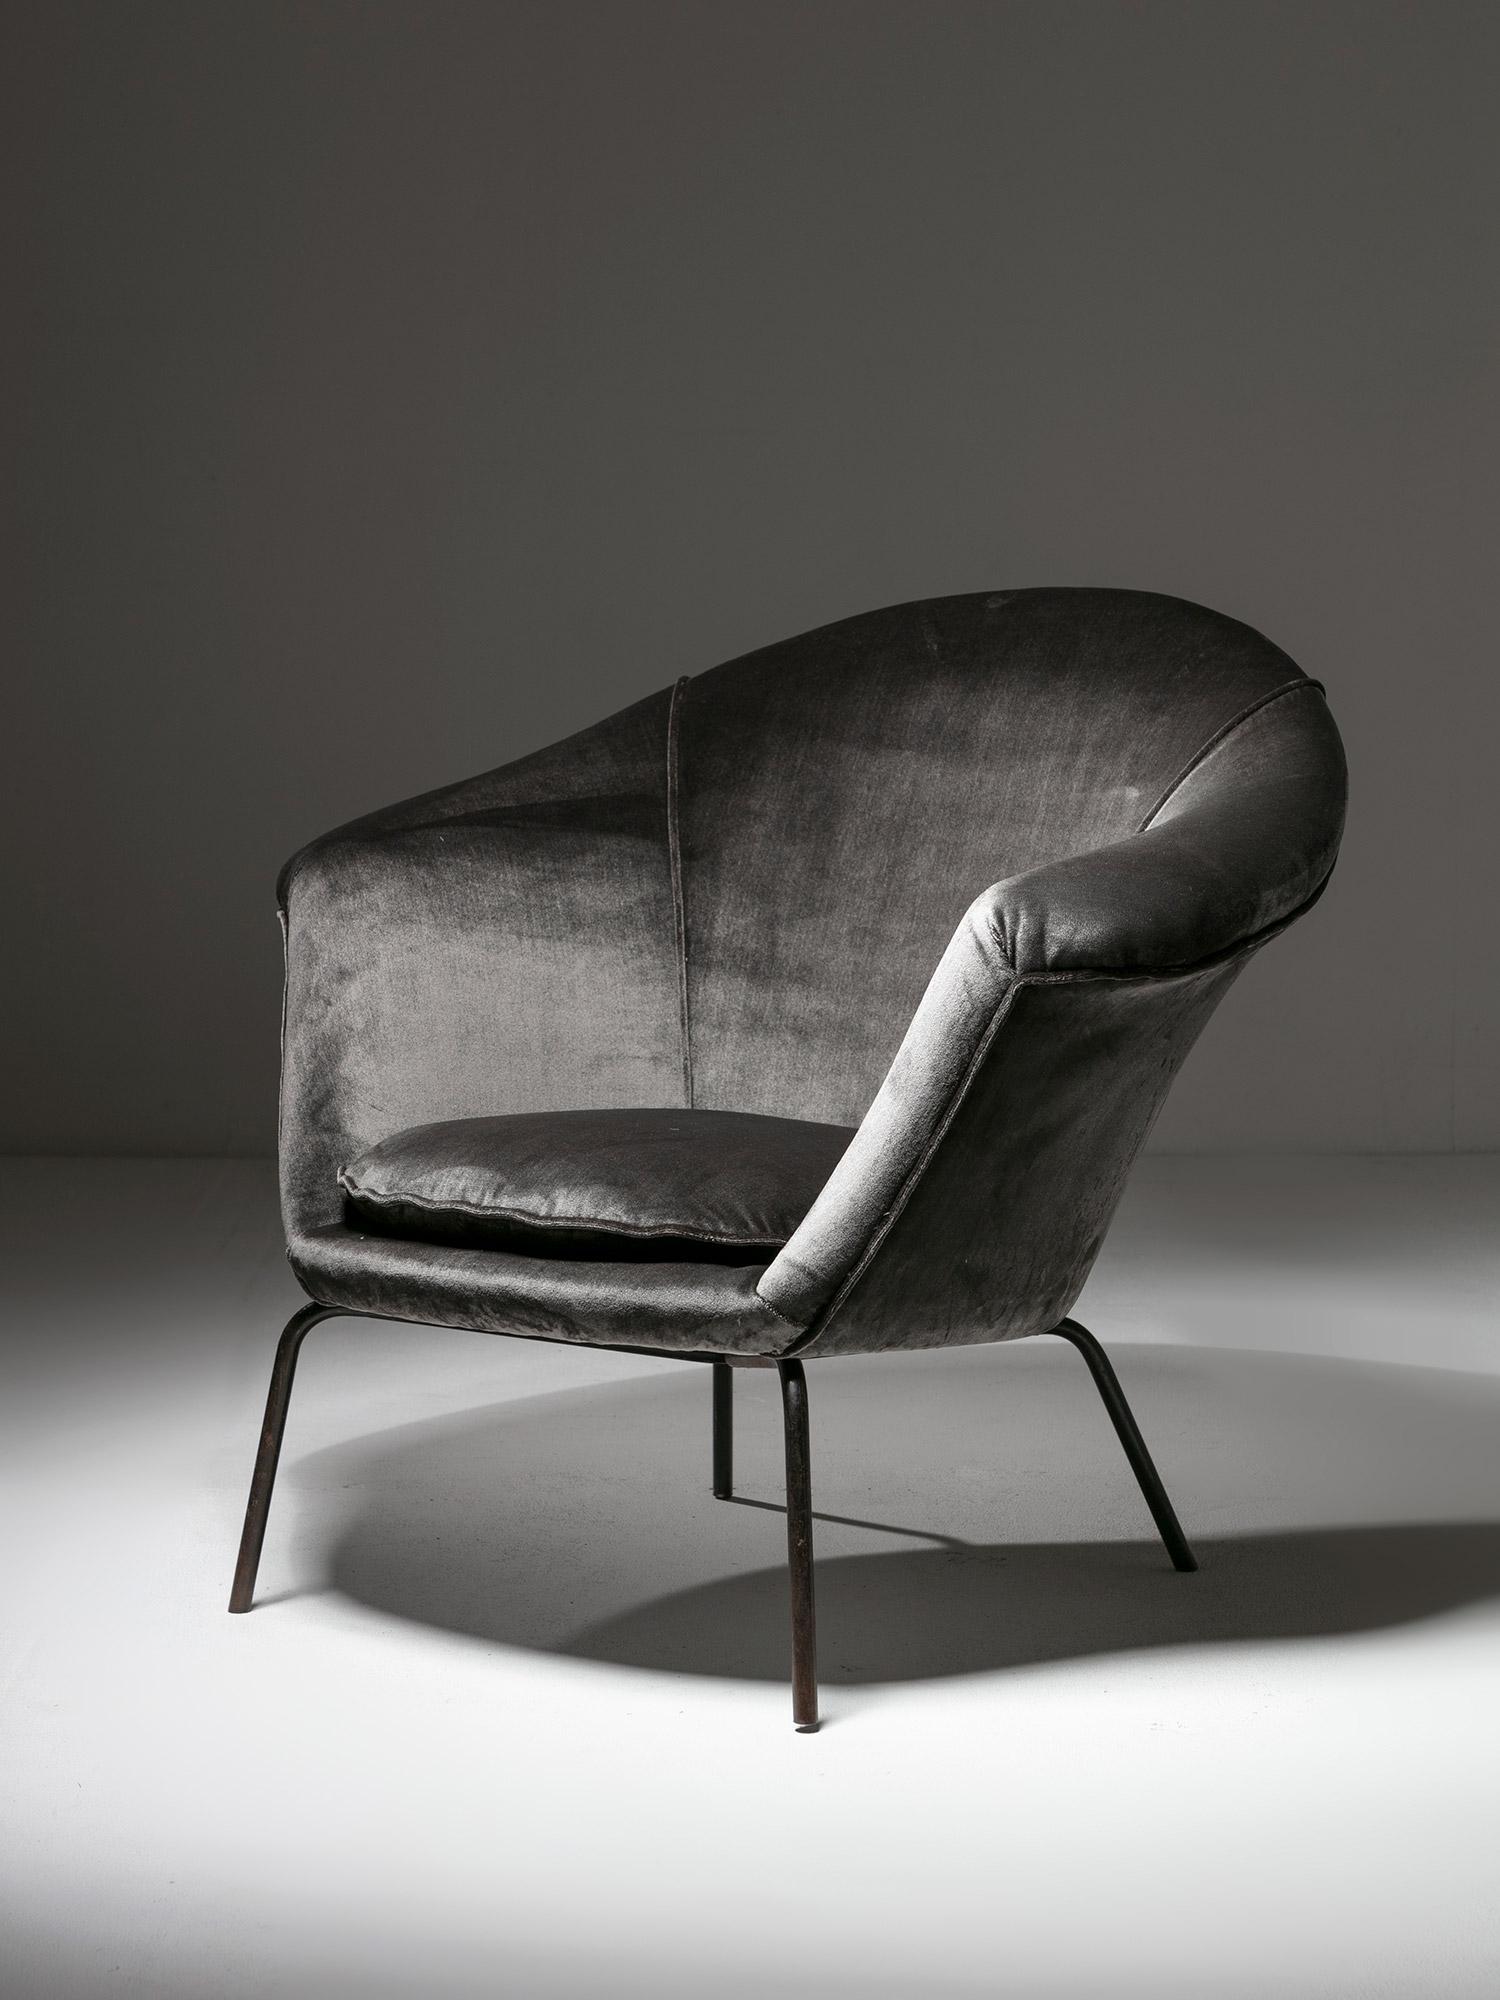 Lounge chair Model 1003 by Henry W. Klein for Cassina.
Cozy chair newly upholstered supported by black metal frame.